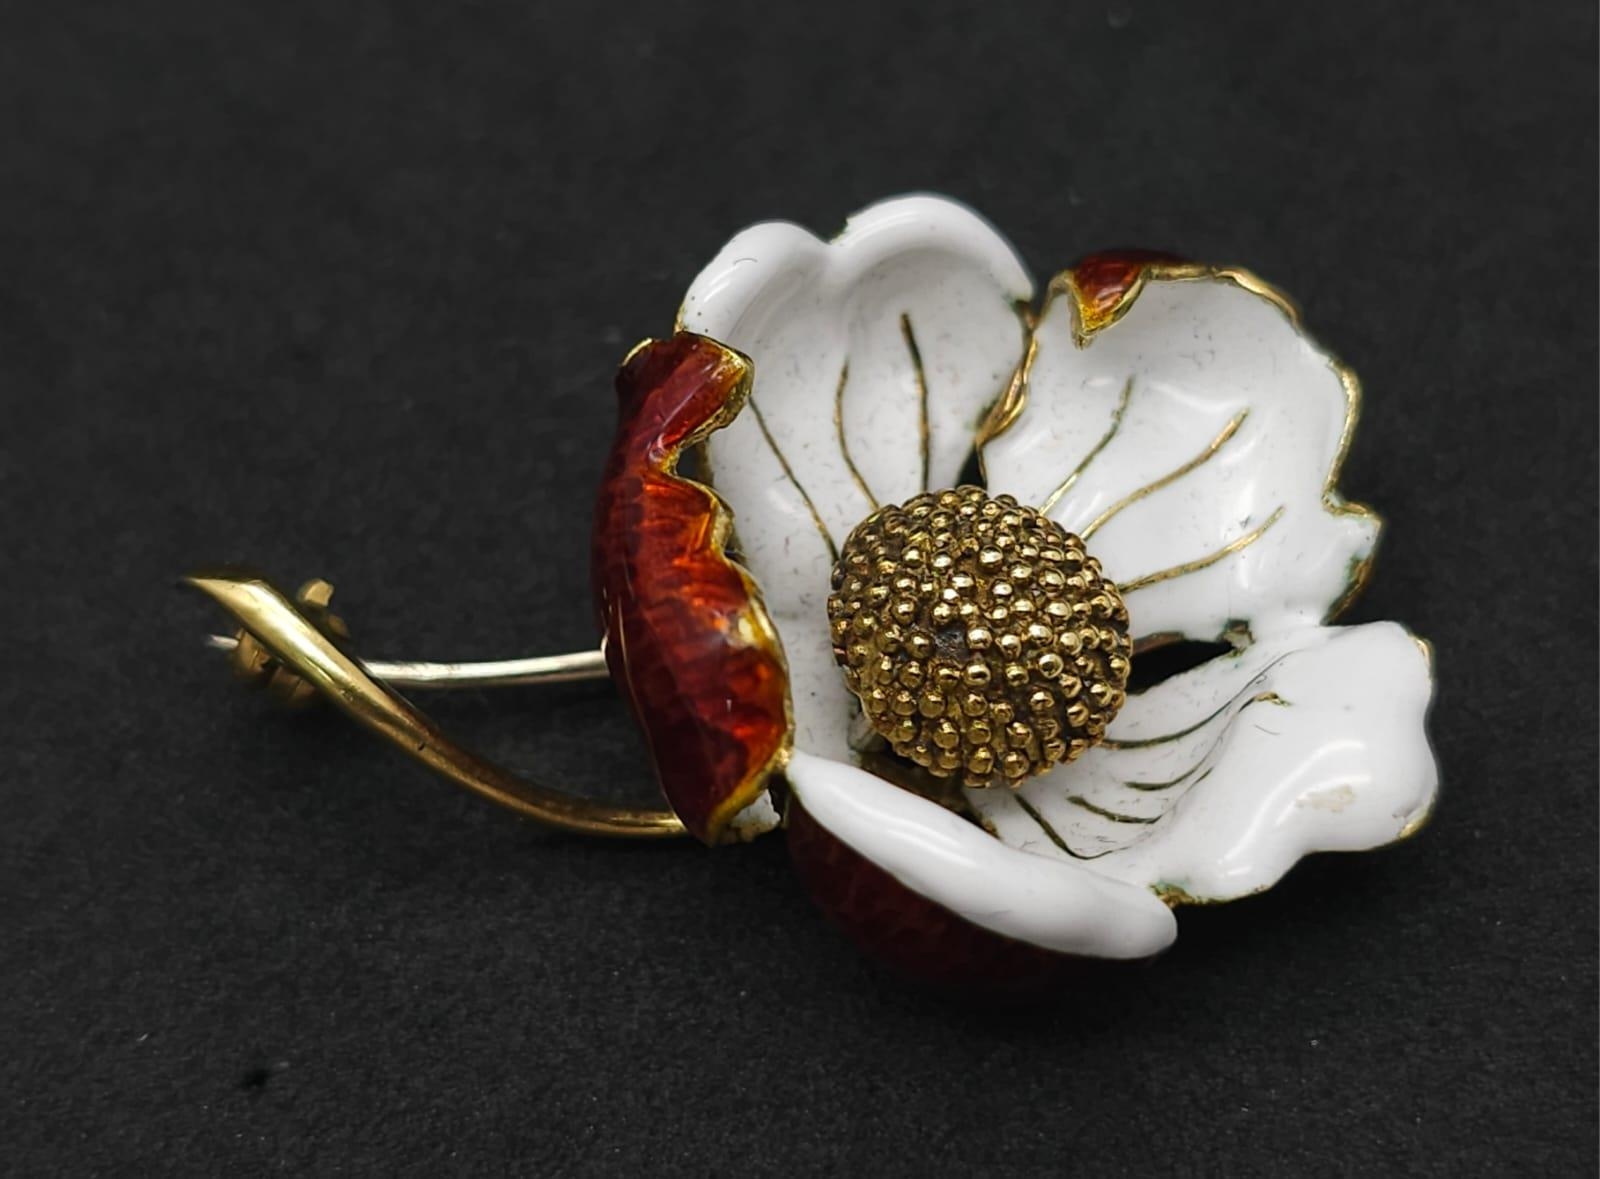 A Wonderful Vintage, Possibly Antique 18K Yellow Gold and Enamel Floral Brooch. Excellent inlaid